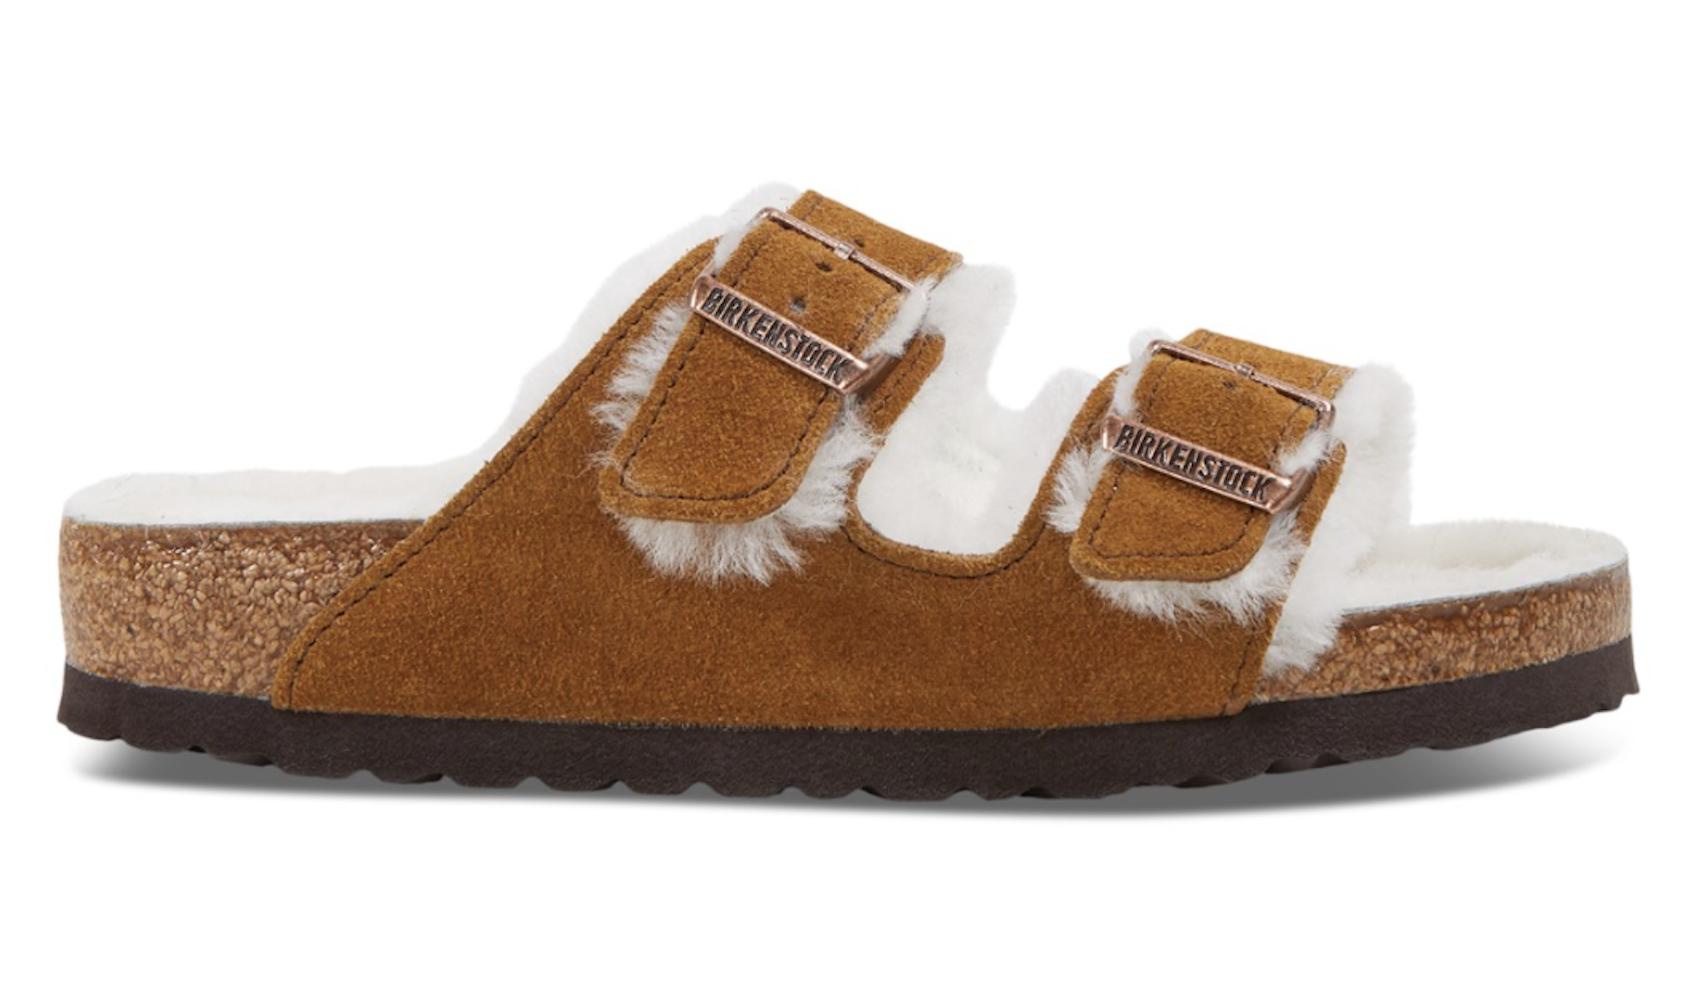 Shearling sandals are a spring 2022 trend to watch - Vancouver Is Awesome